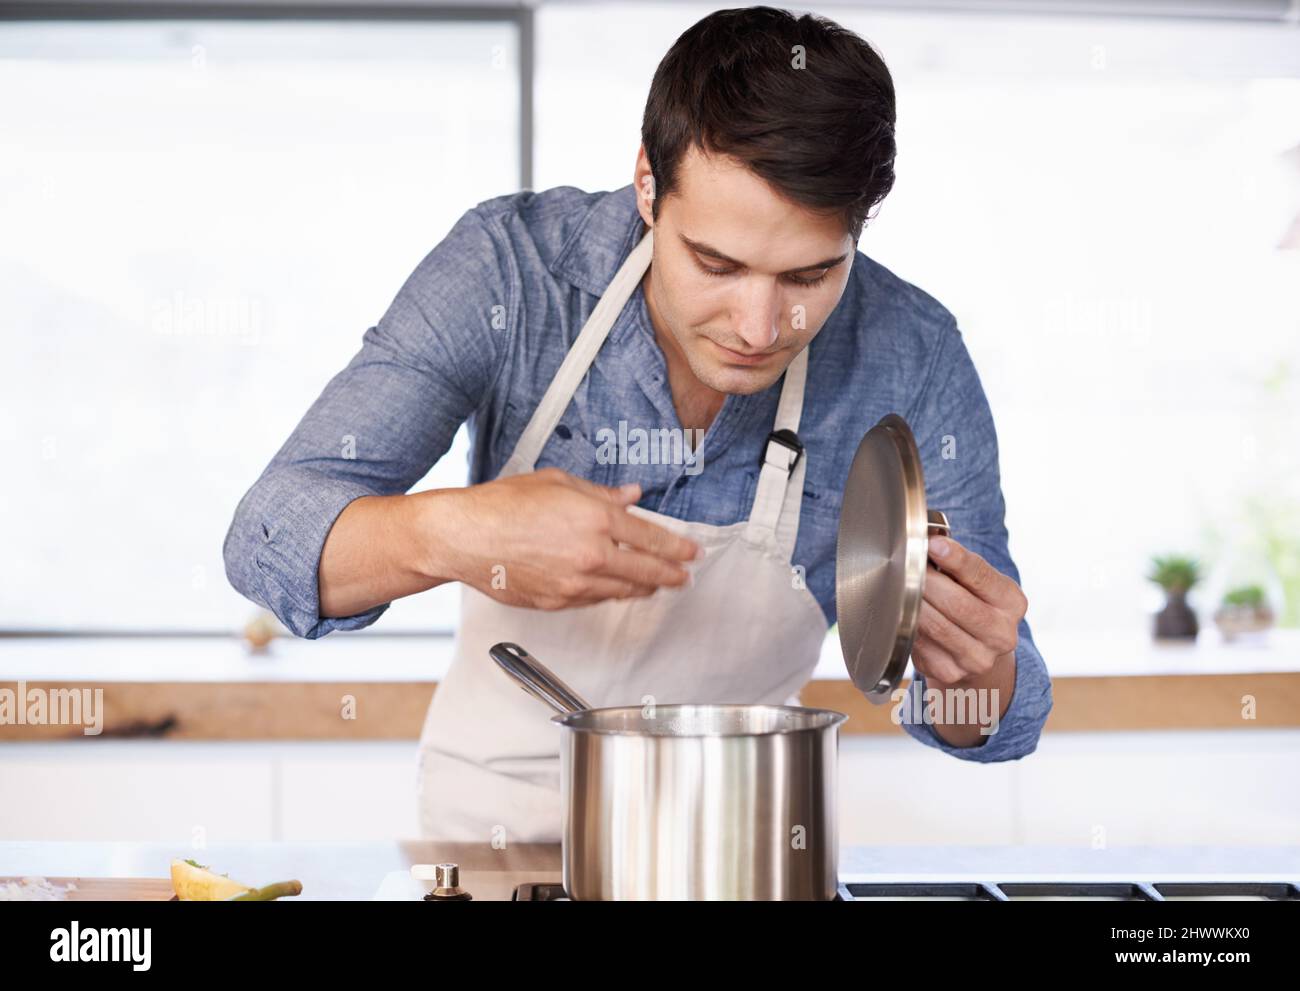 Smell the aroma. Shot of a young man enjoying the aroma of his meal. Stock Photo